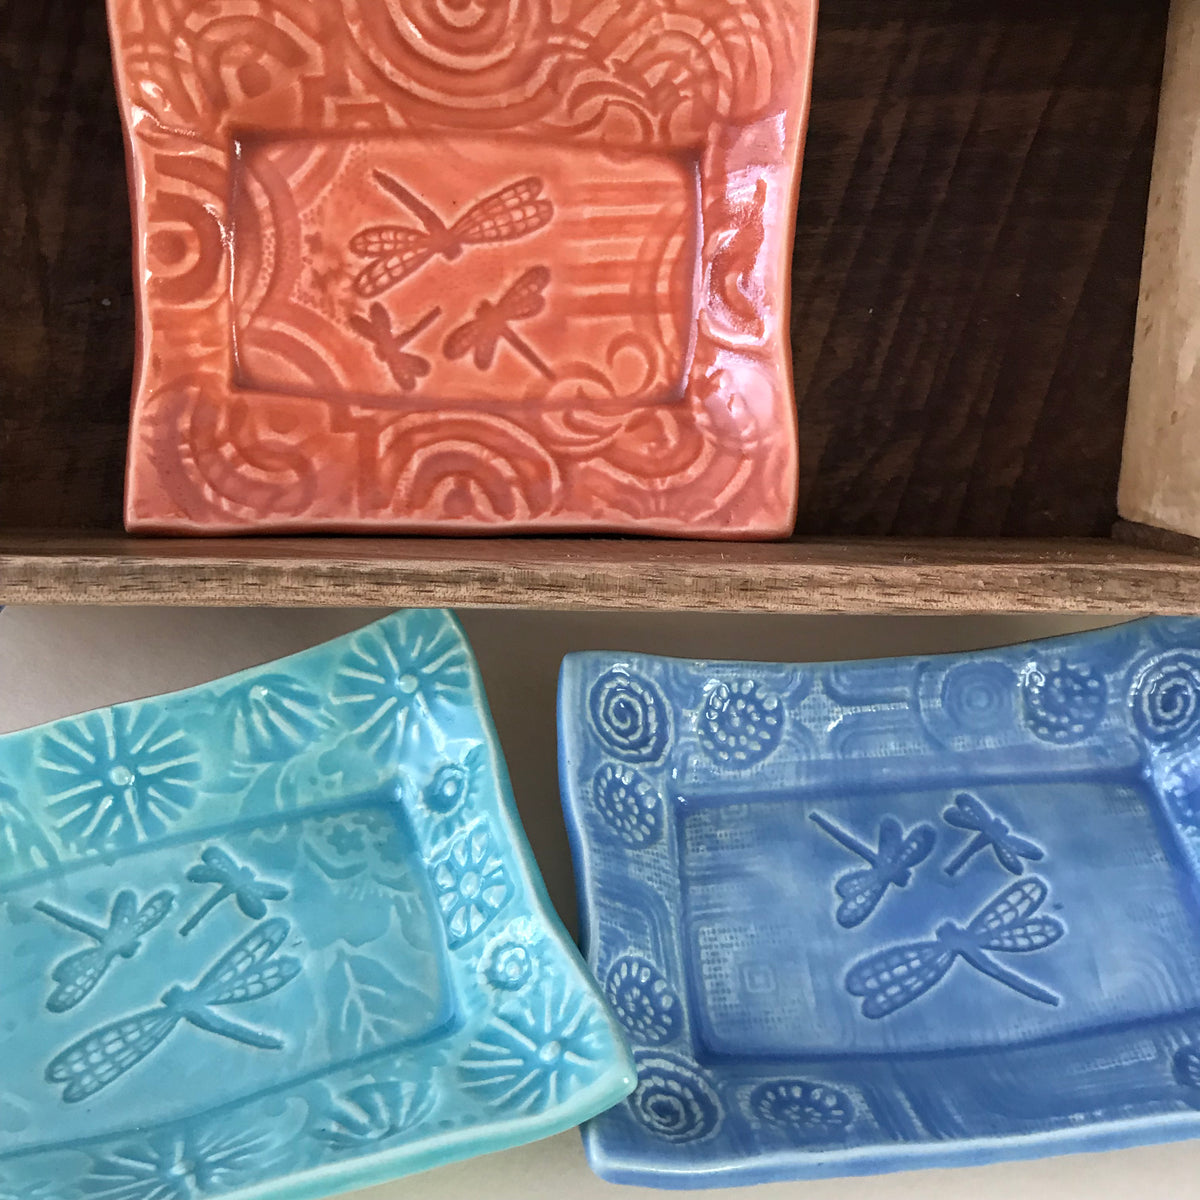 Our Dragonfly Soap Dishes are handmade and based upon an original design created by Lorraine Oerth.  